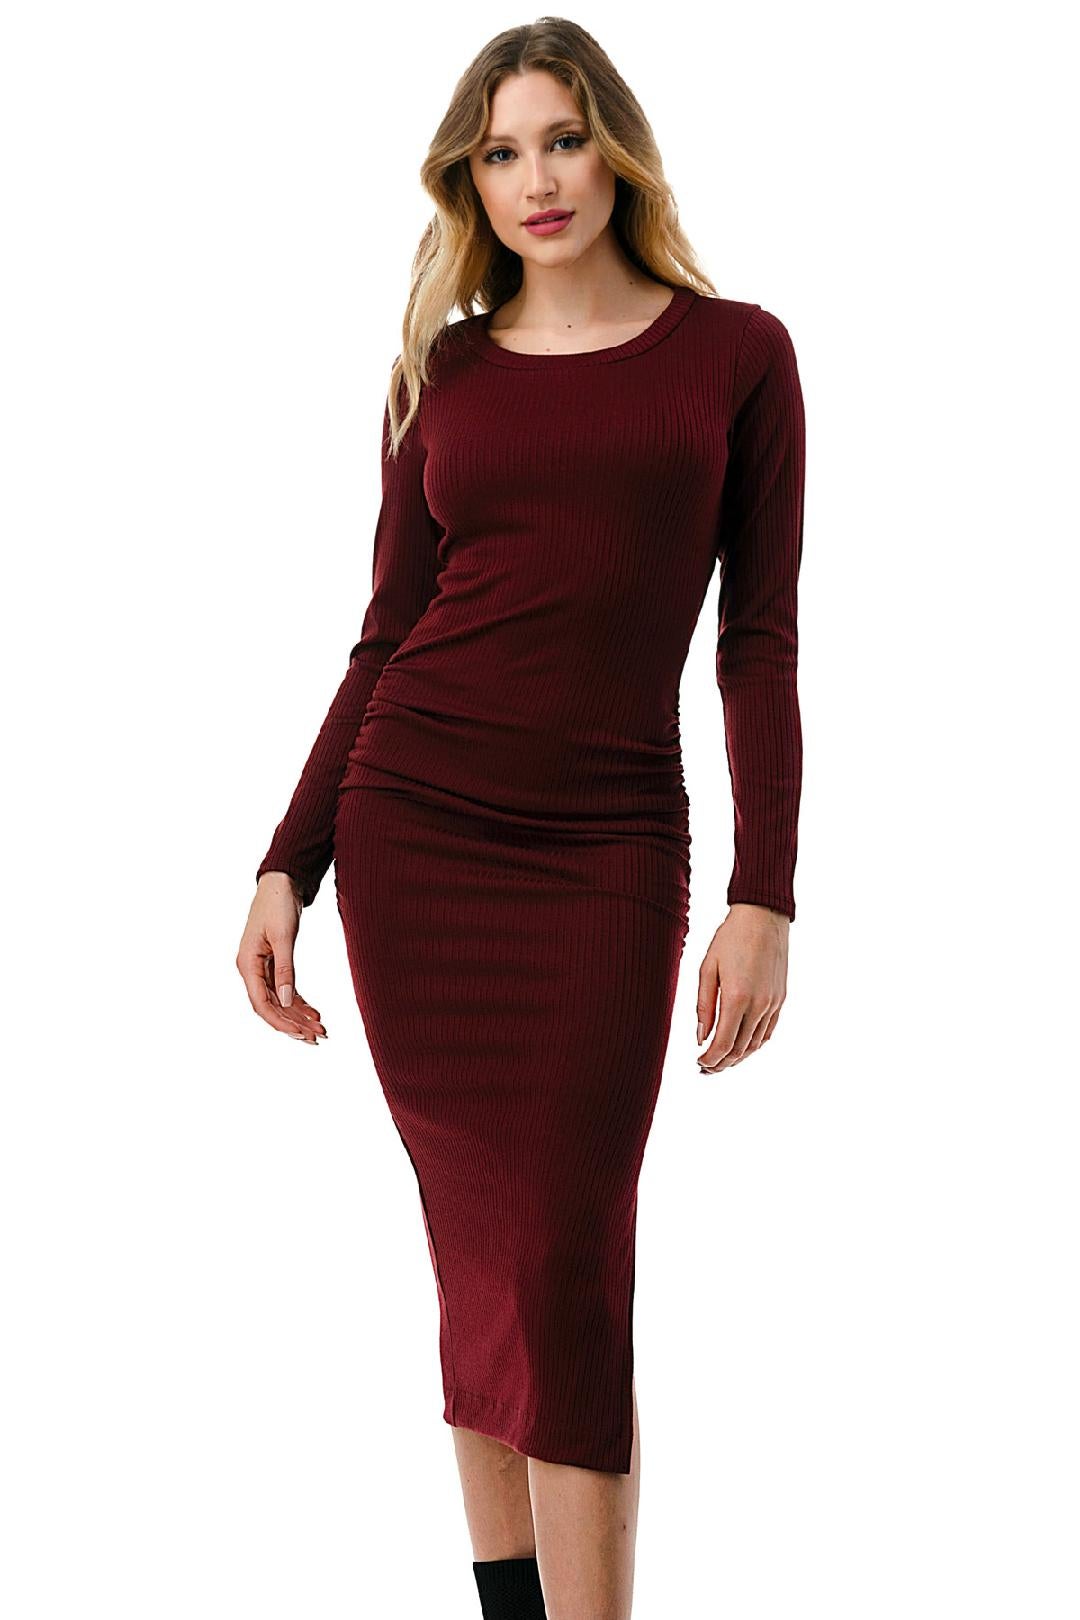  FINAL SALE Wine Long Sleeve Dress with Ruched Sides